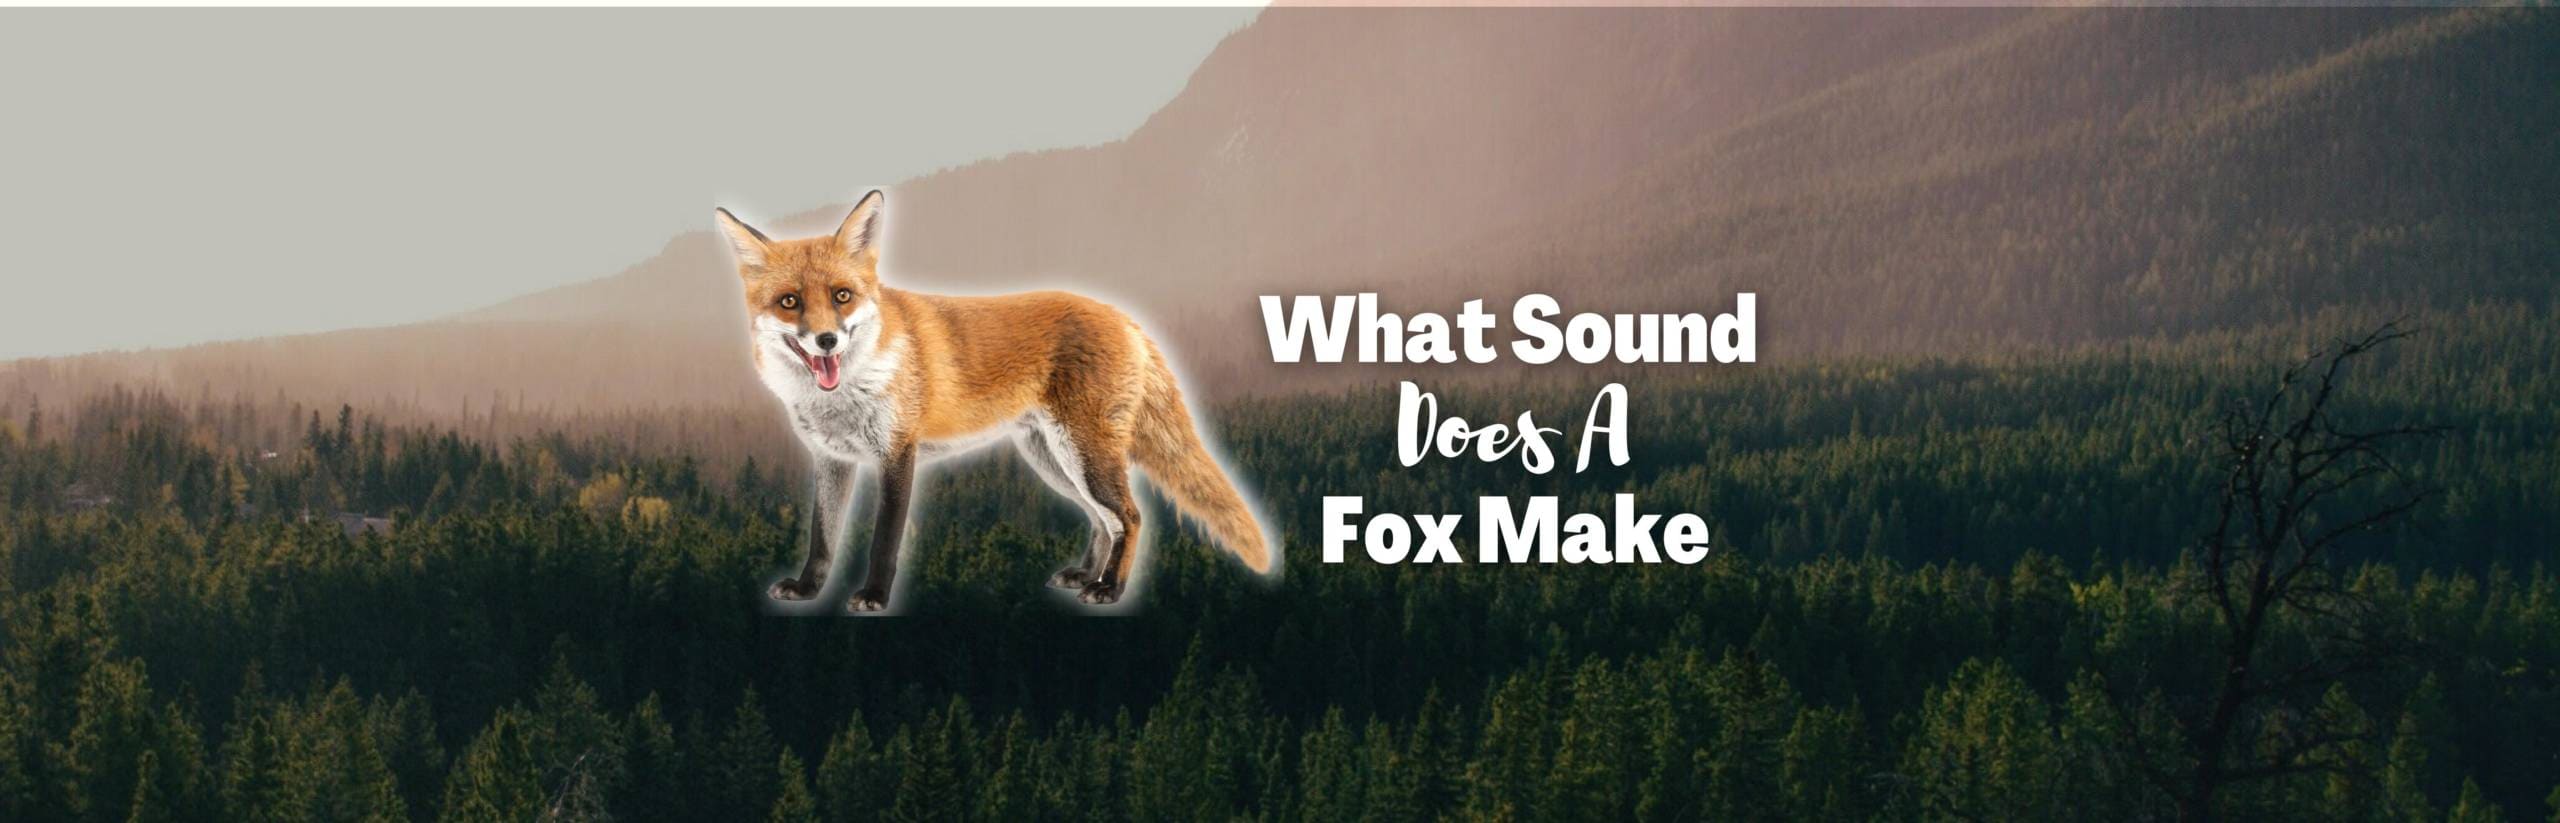 What Sound Does a Fox Make? The Surprising Truth Behind the Nocturnal Screams